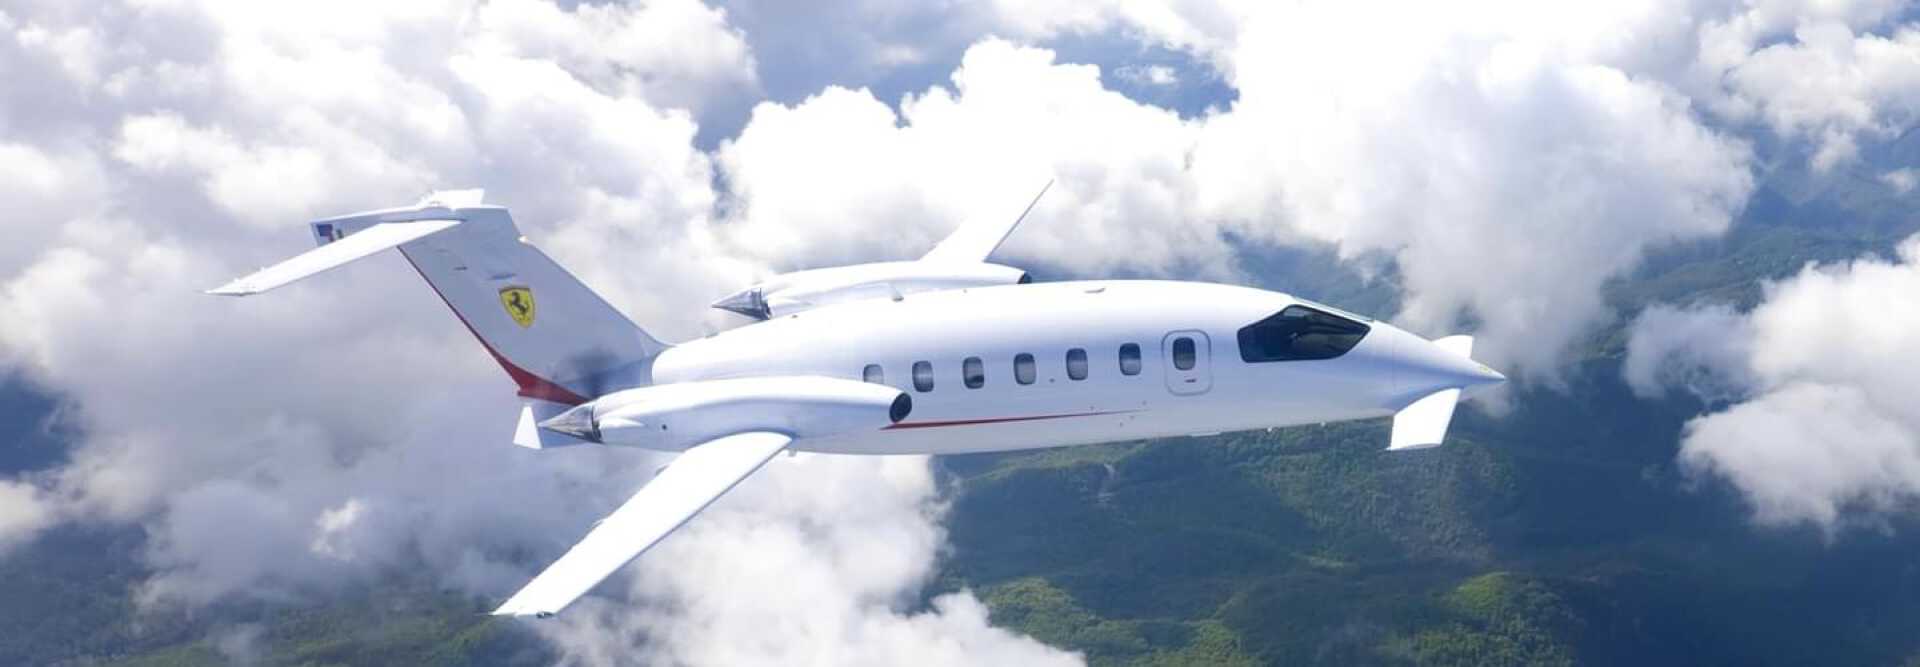 Turboprop Piaggio Avanti P180 to charter for private aviation flights with LunaJets, italian design, combination of high performance and comfort